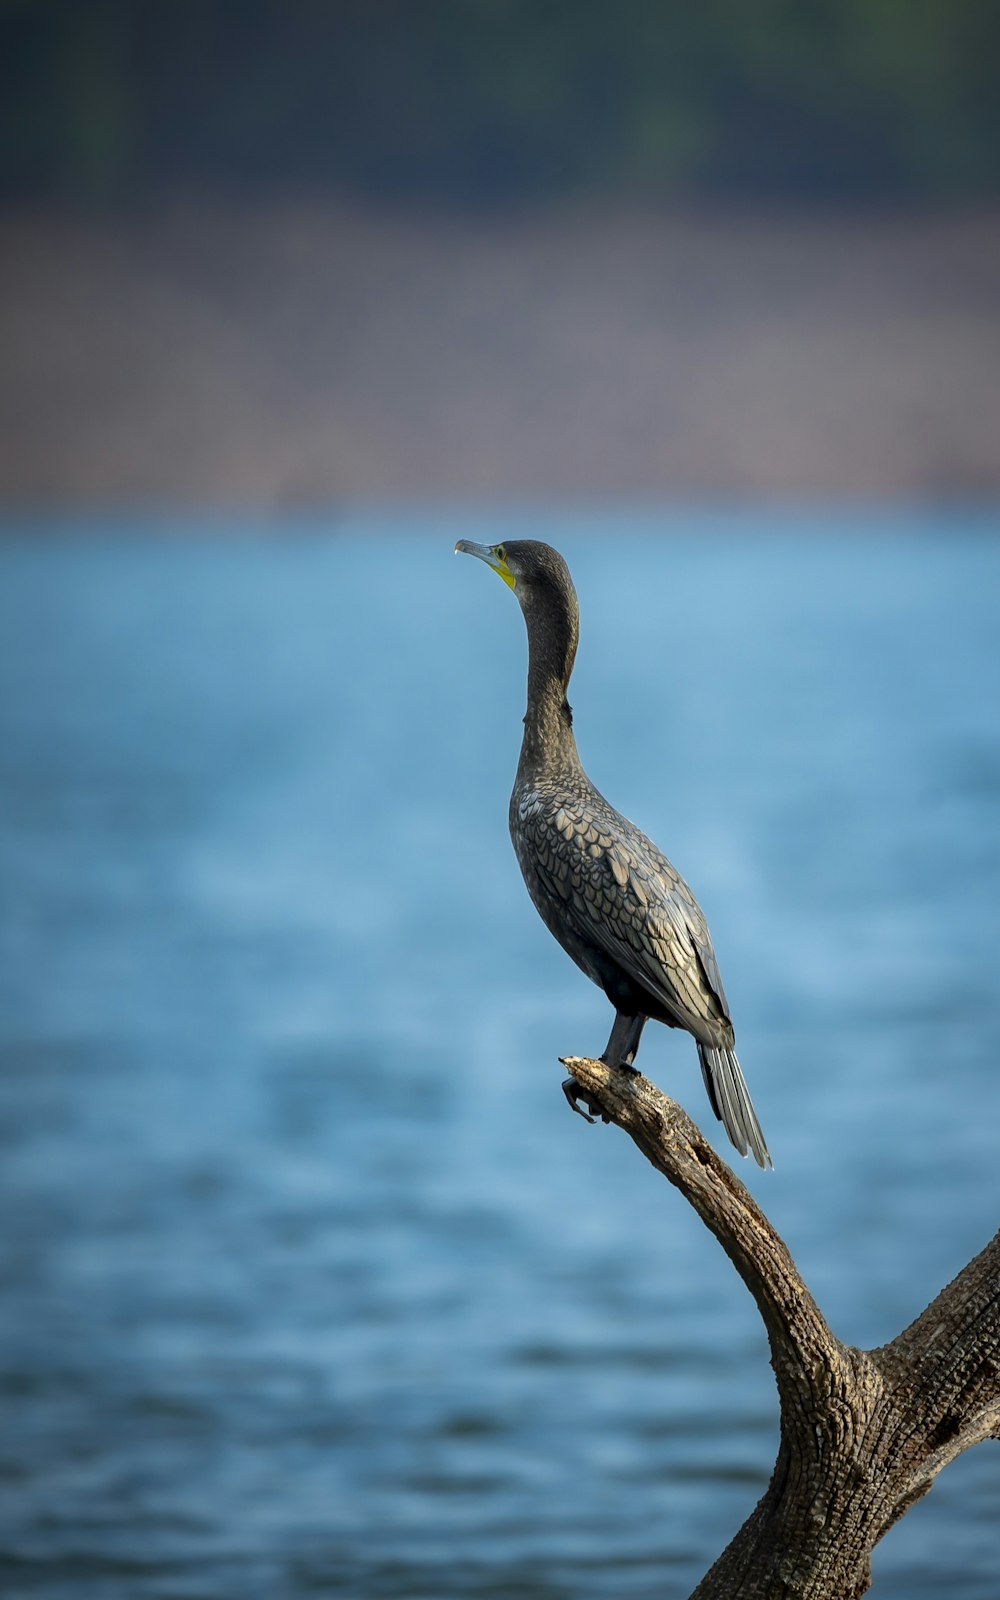 a bird sitting on a branch in front of a body of water